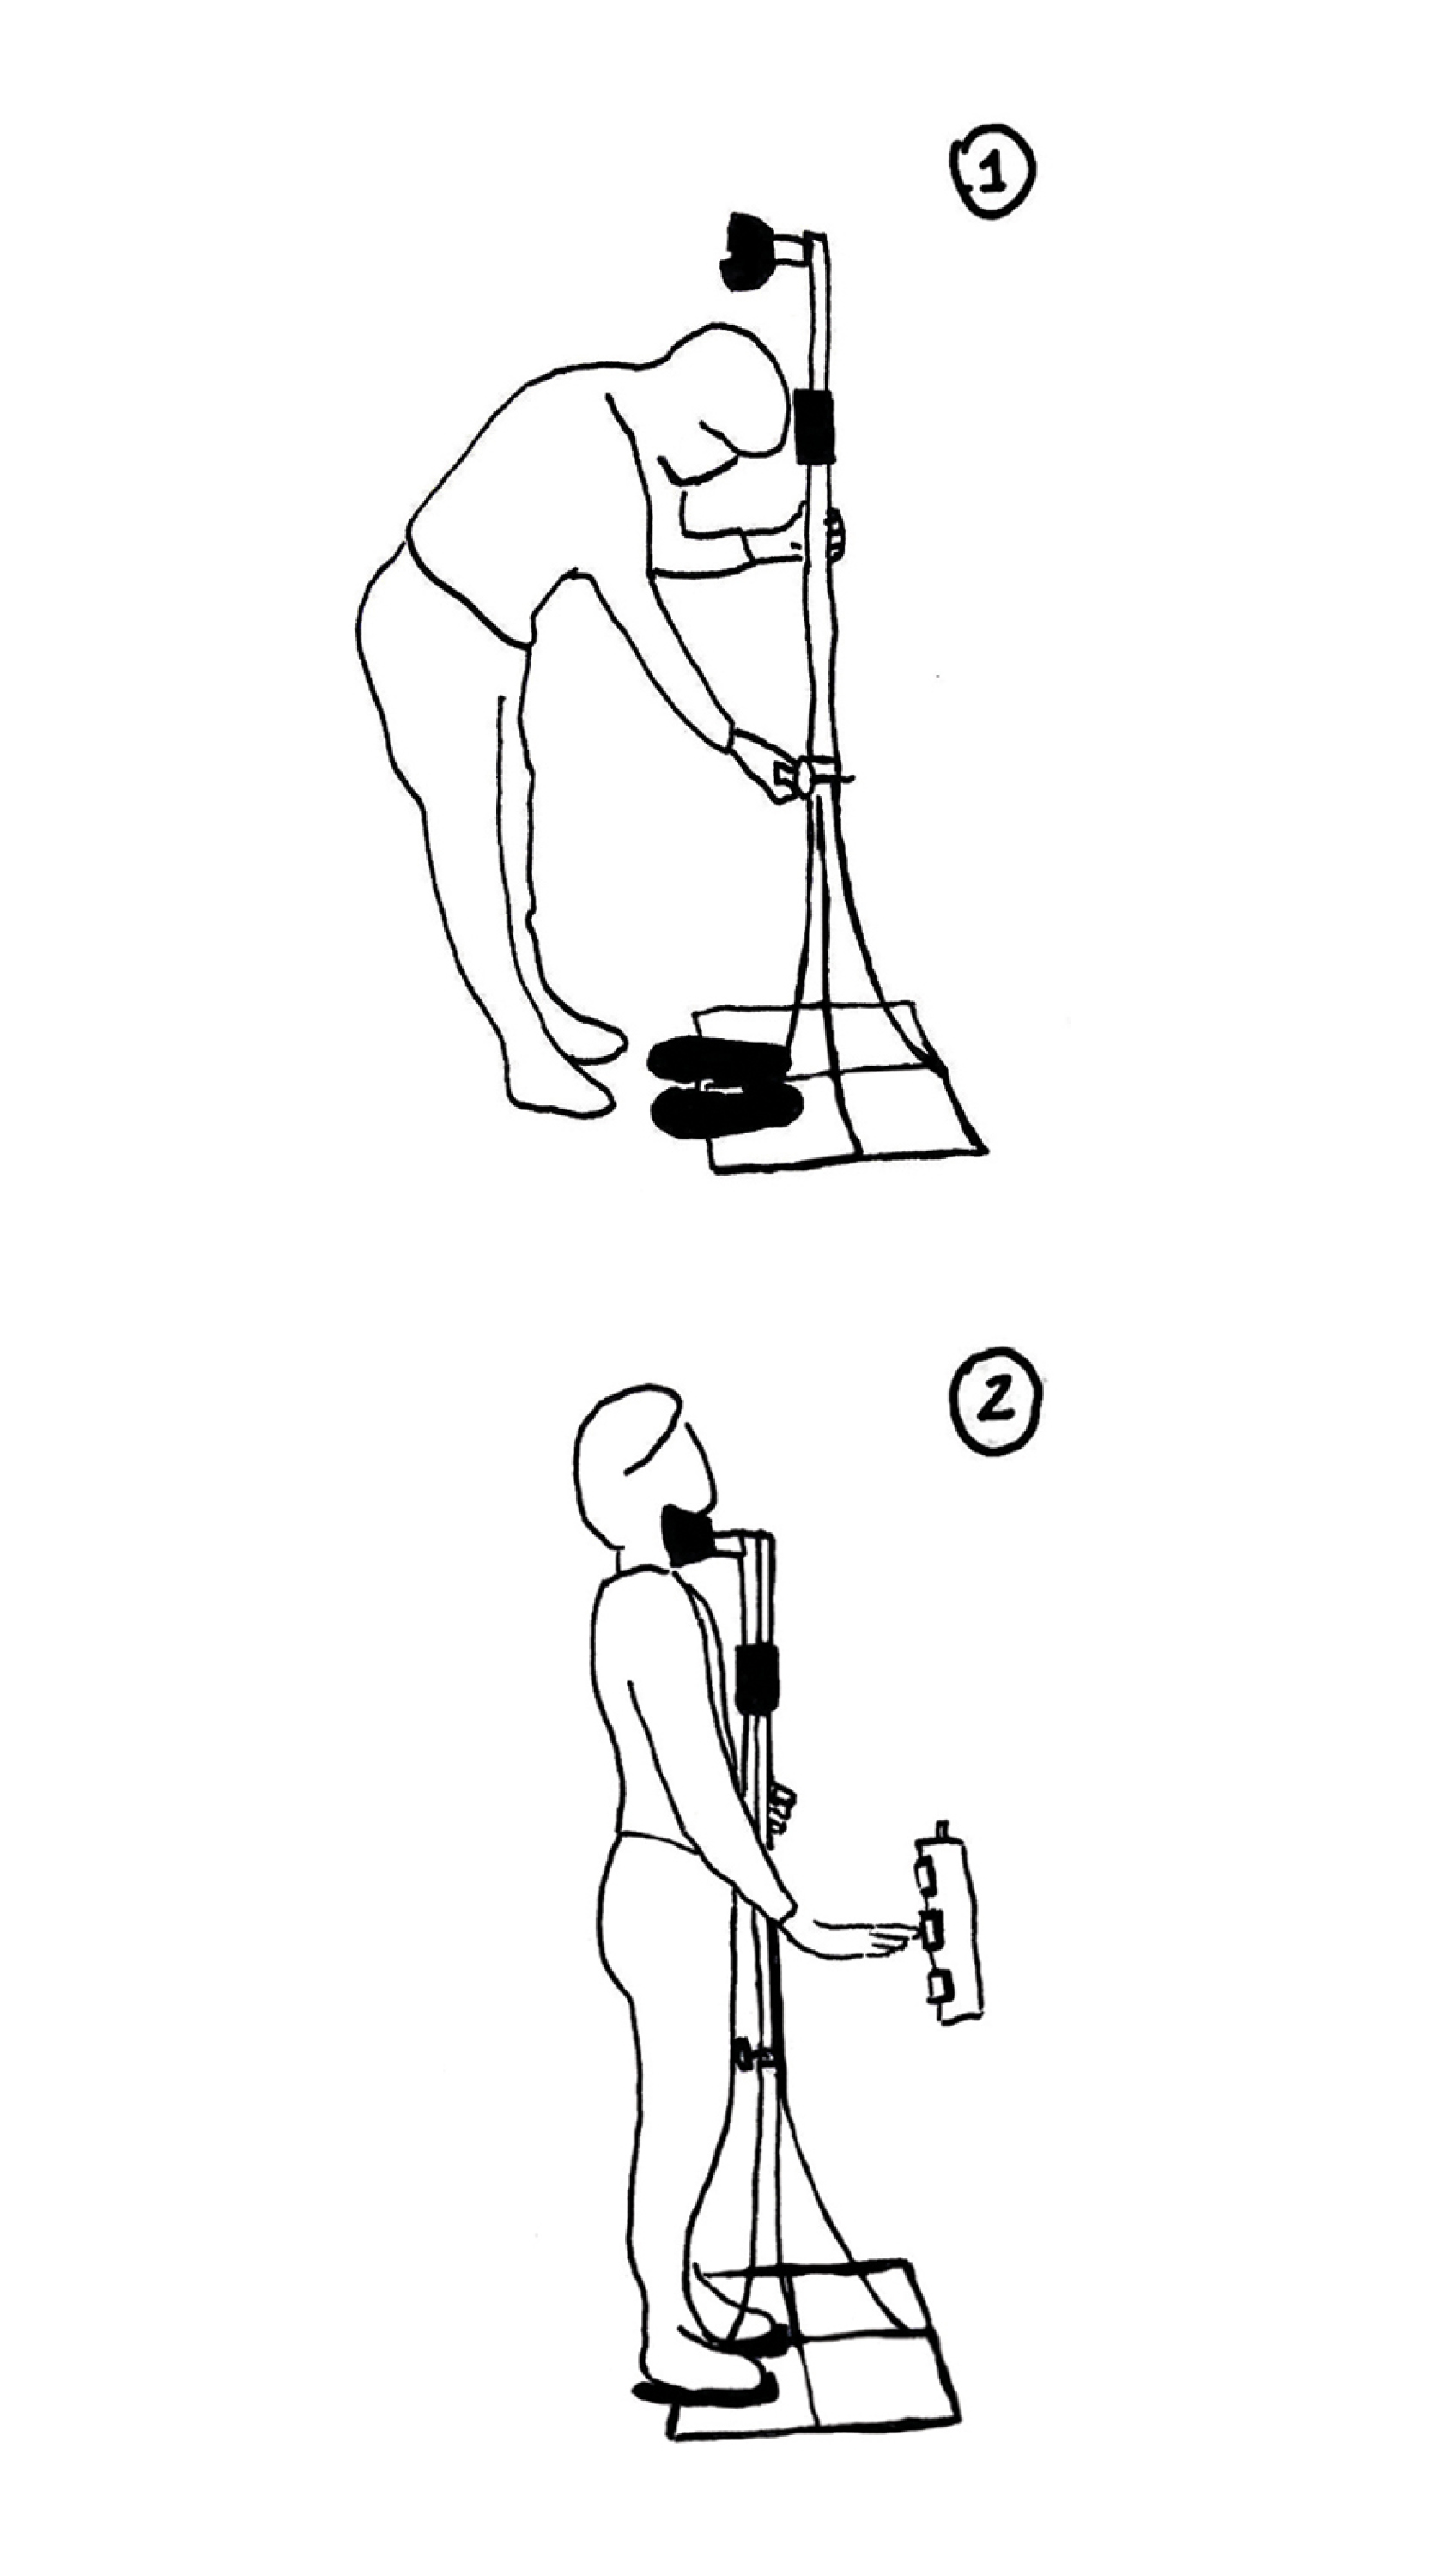 Sketch of 'Anguish Massager' (2016) showing the user adjusting the height of the neck piece, and then embracing the sculpture and hitting the button.